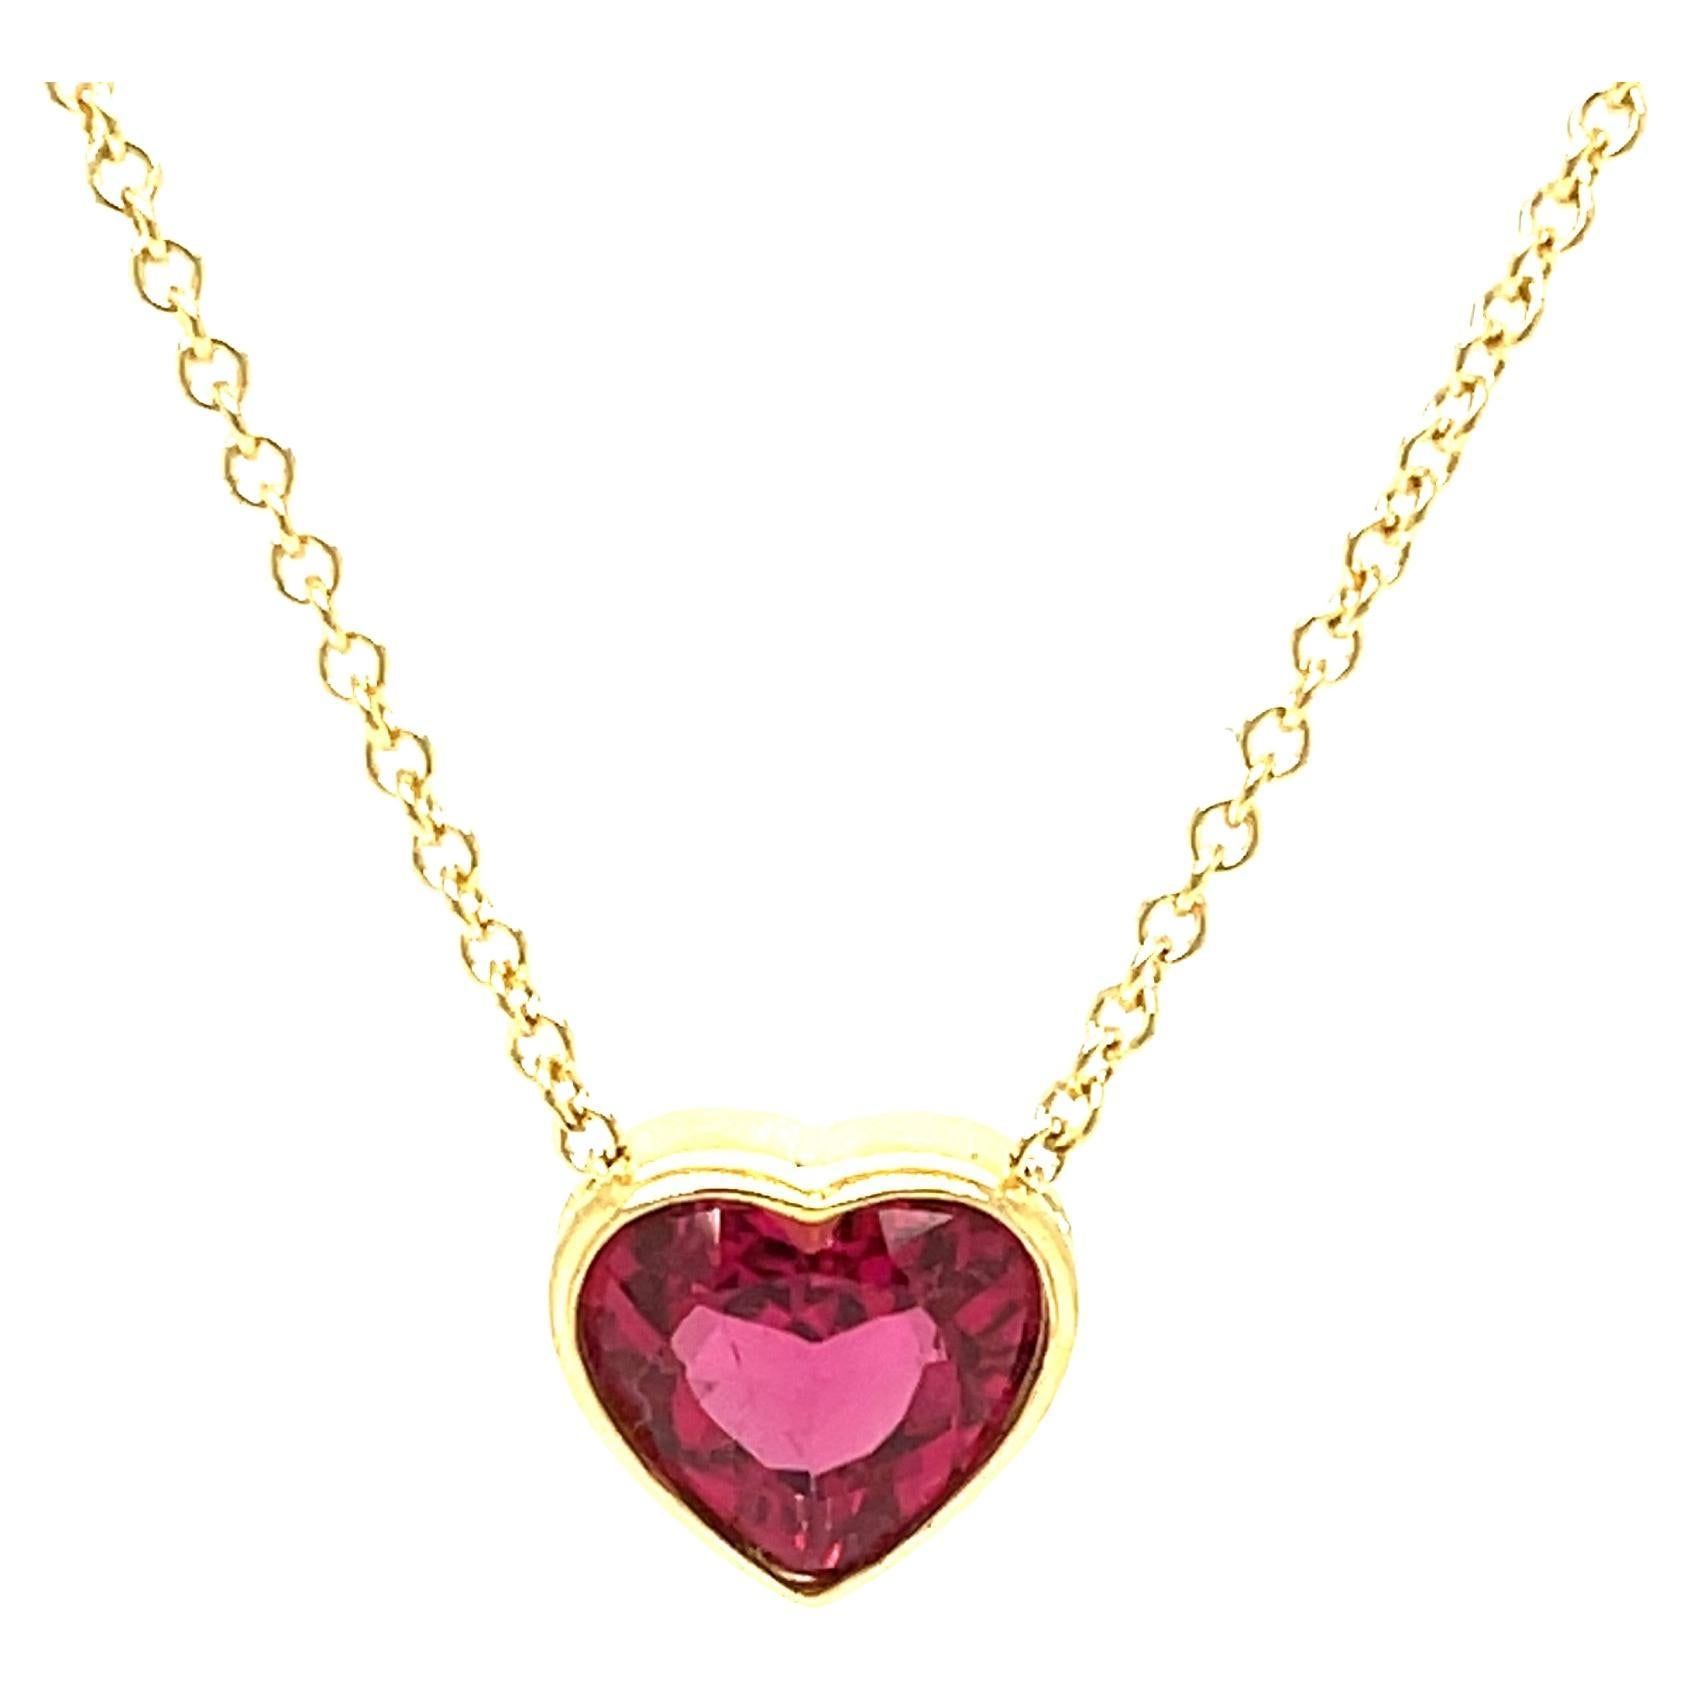 Artisan 1.99 Carat Heart Shaped Pink Rubellite Tourmaline Necklace in 18k Yellow Gold For Sale